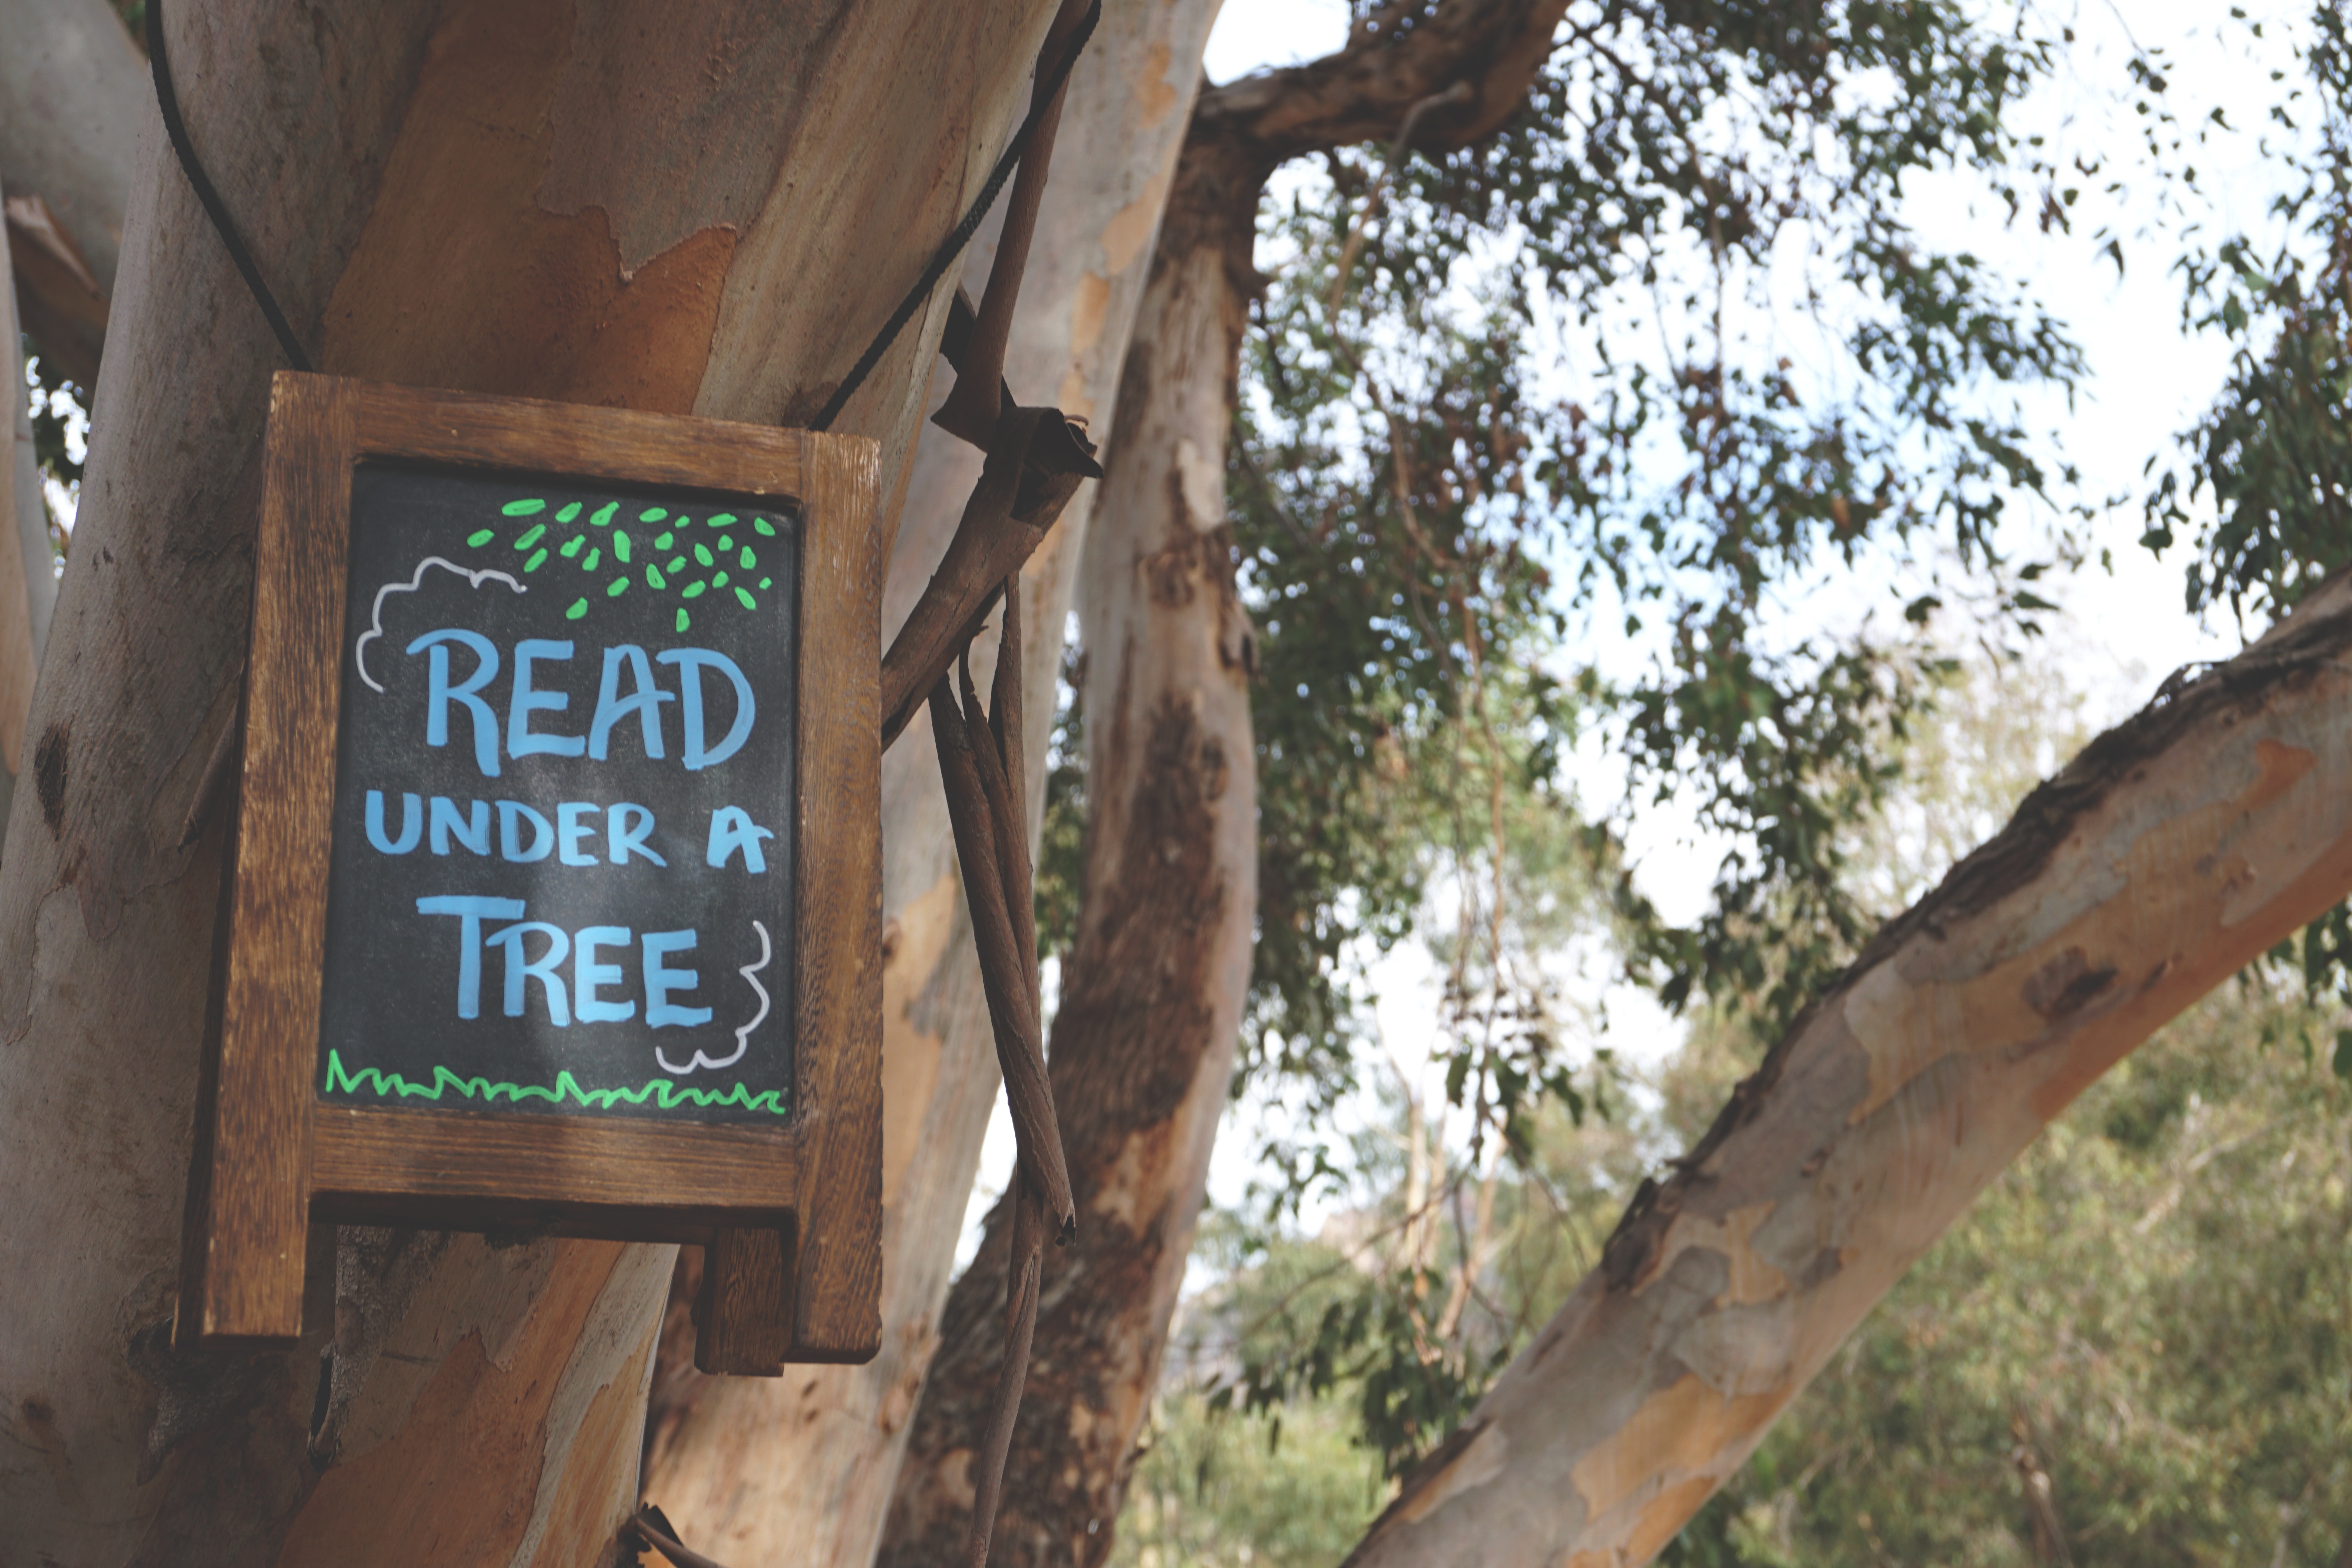 Read under a tree signage hanging on branch tree photo